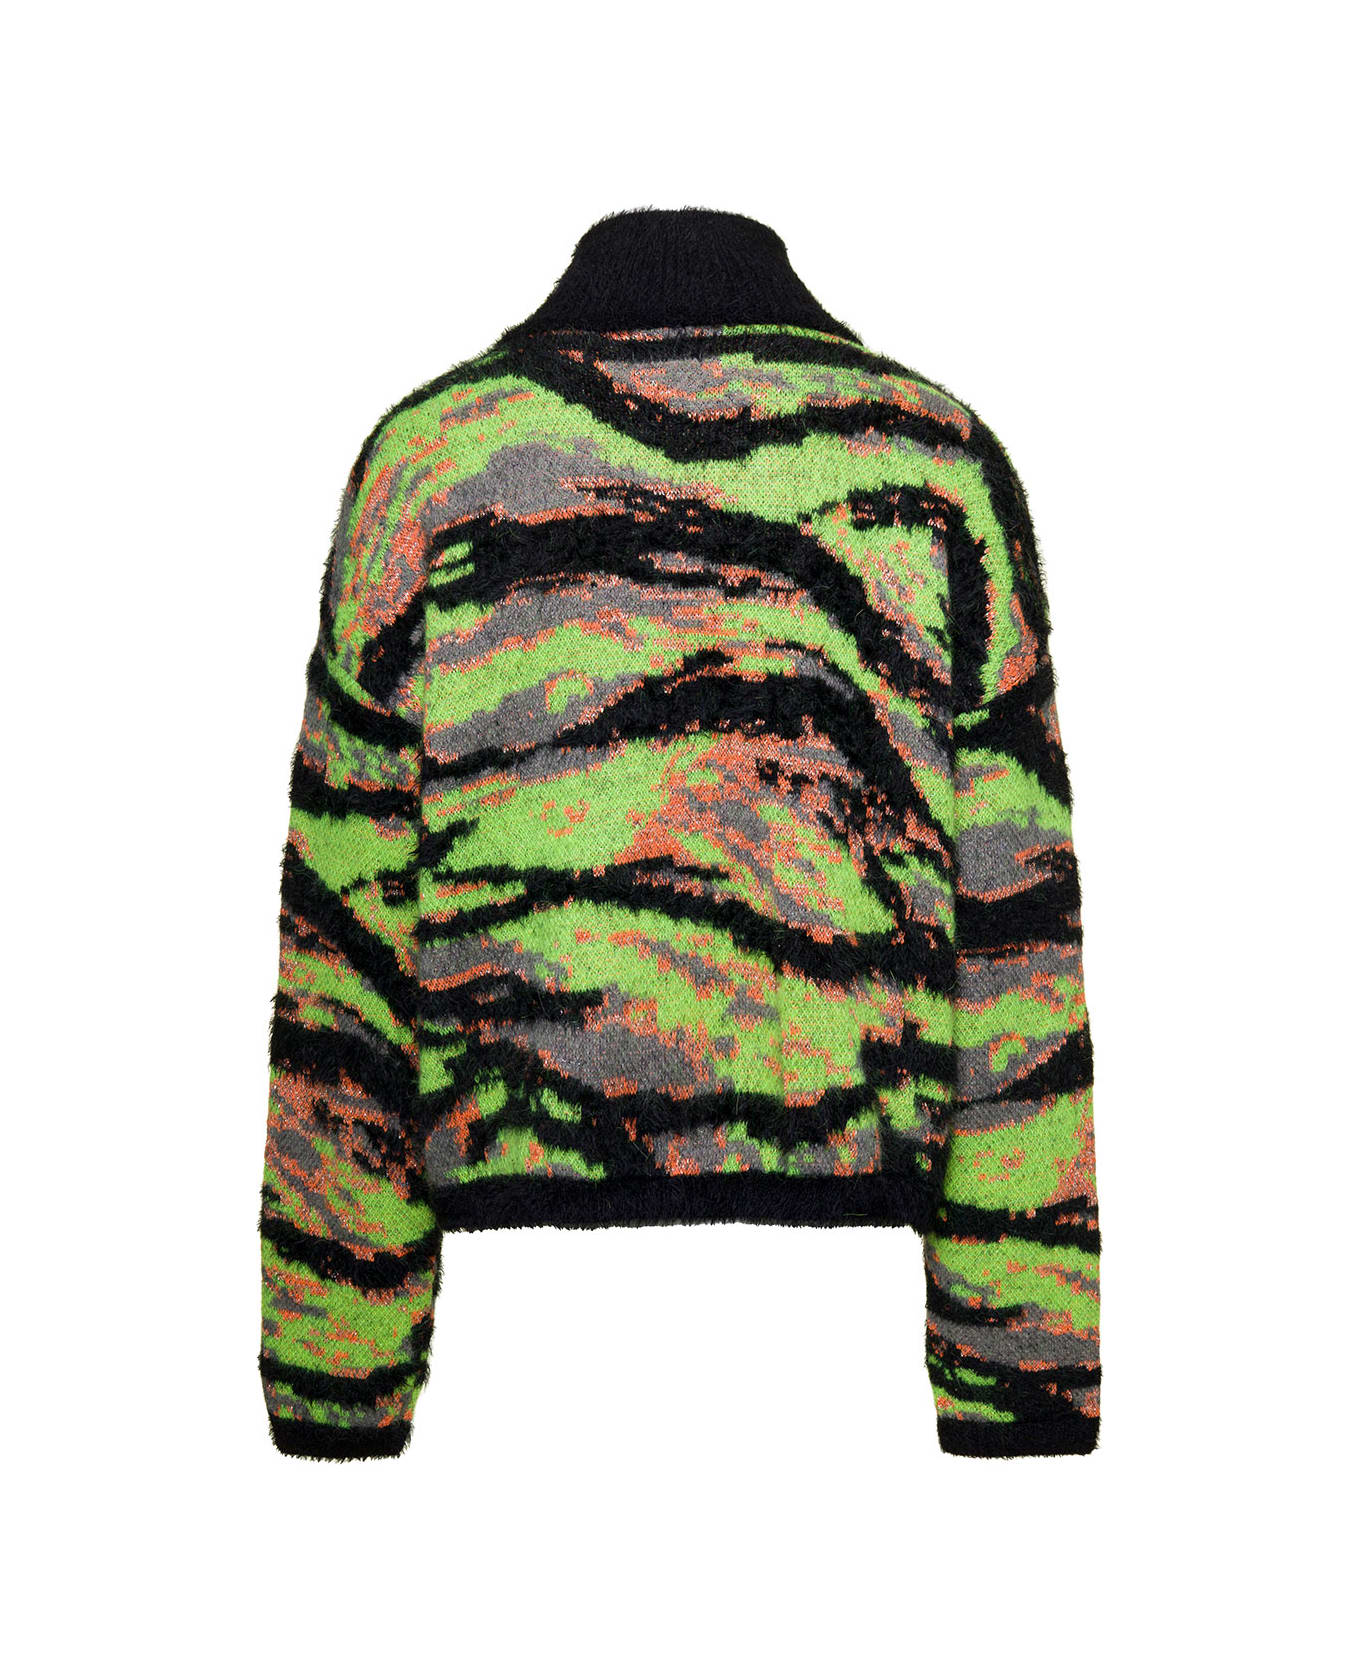 ERL Green High Neck Sweater With All-over Jacquard Graphic Pattern In Wool And Cotton Blend - Multicolor ニットウェア